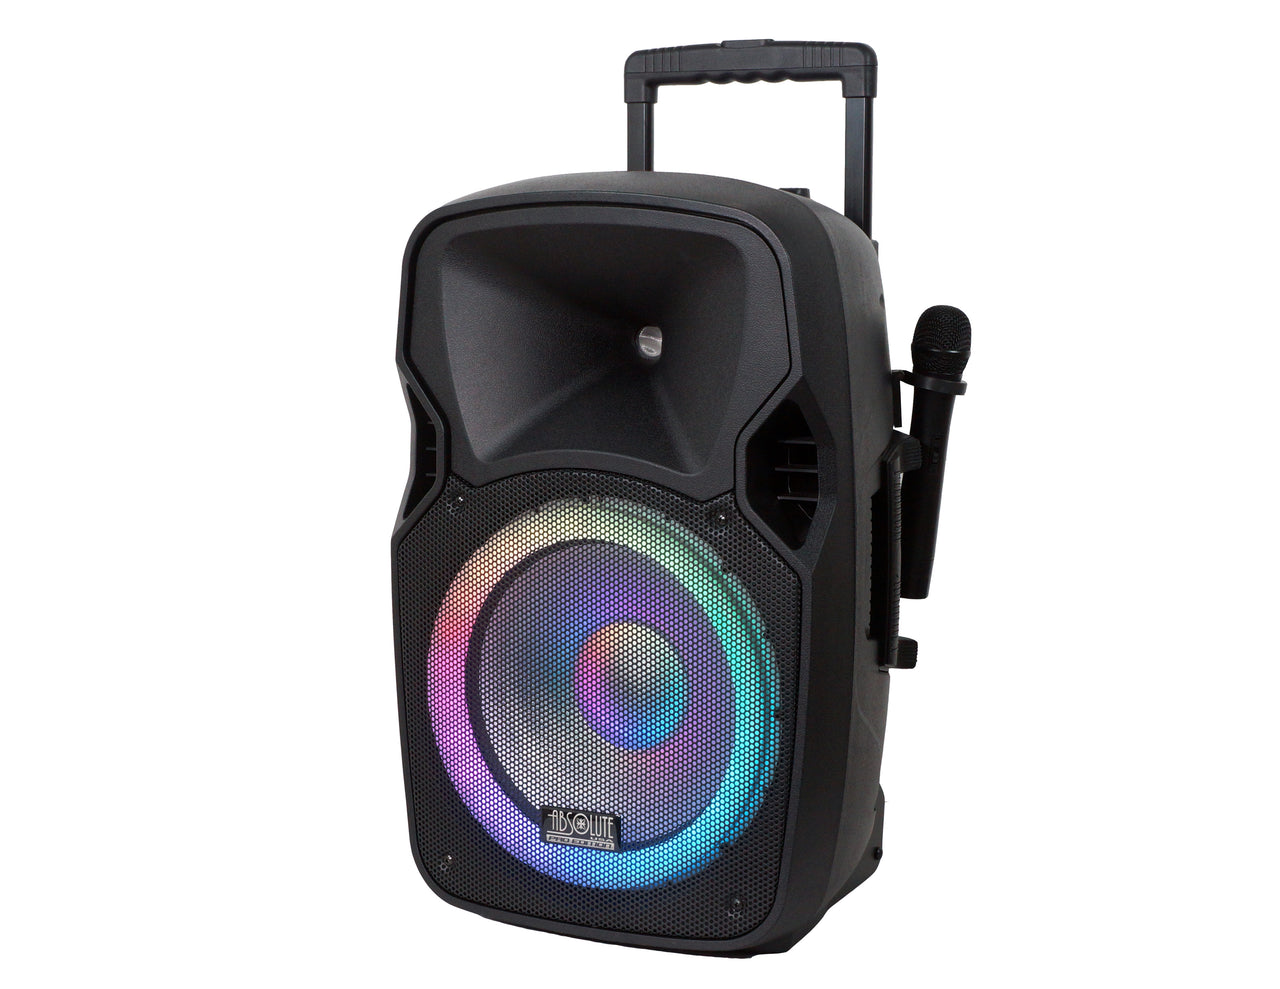 Absolute USA USPROBAT12 12" Wireless Portable PA Speaker System 3000W High Powered Bluetooth Indoor and Outdoor DJ PA Sound Stereo Loudspeaker USB SD MP3 AUX Input Flashing Party Light & FM Radio